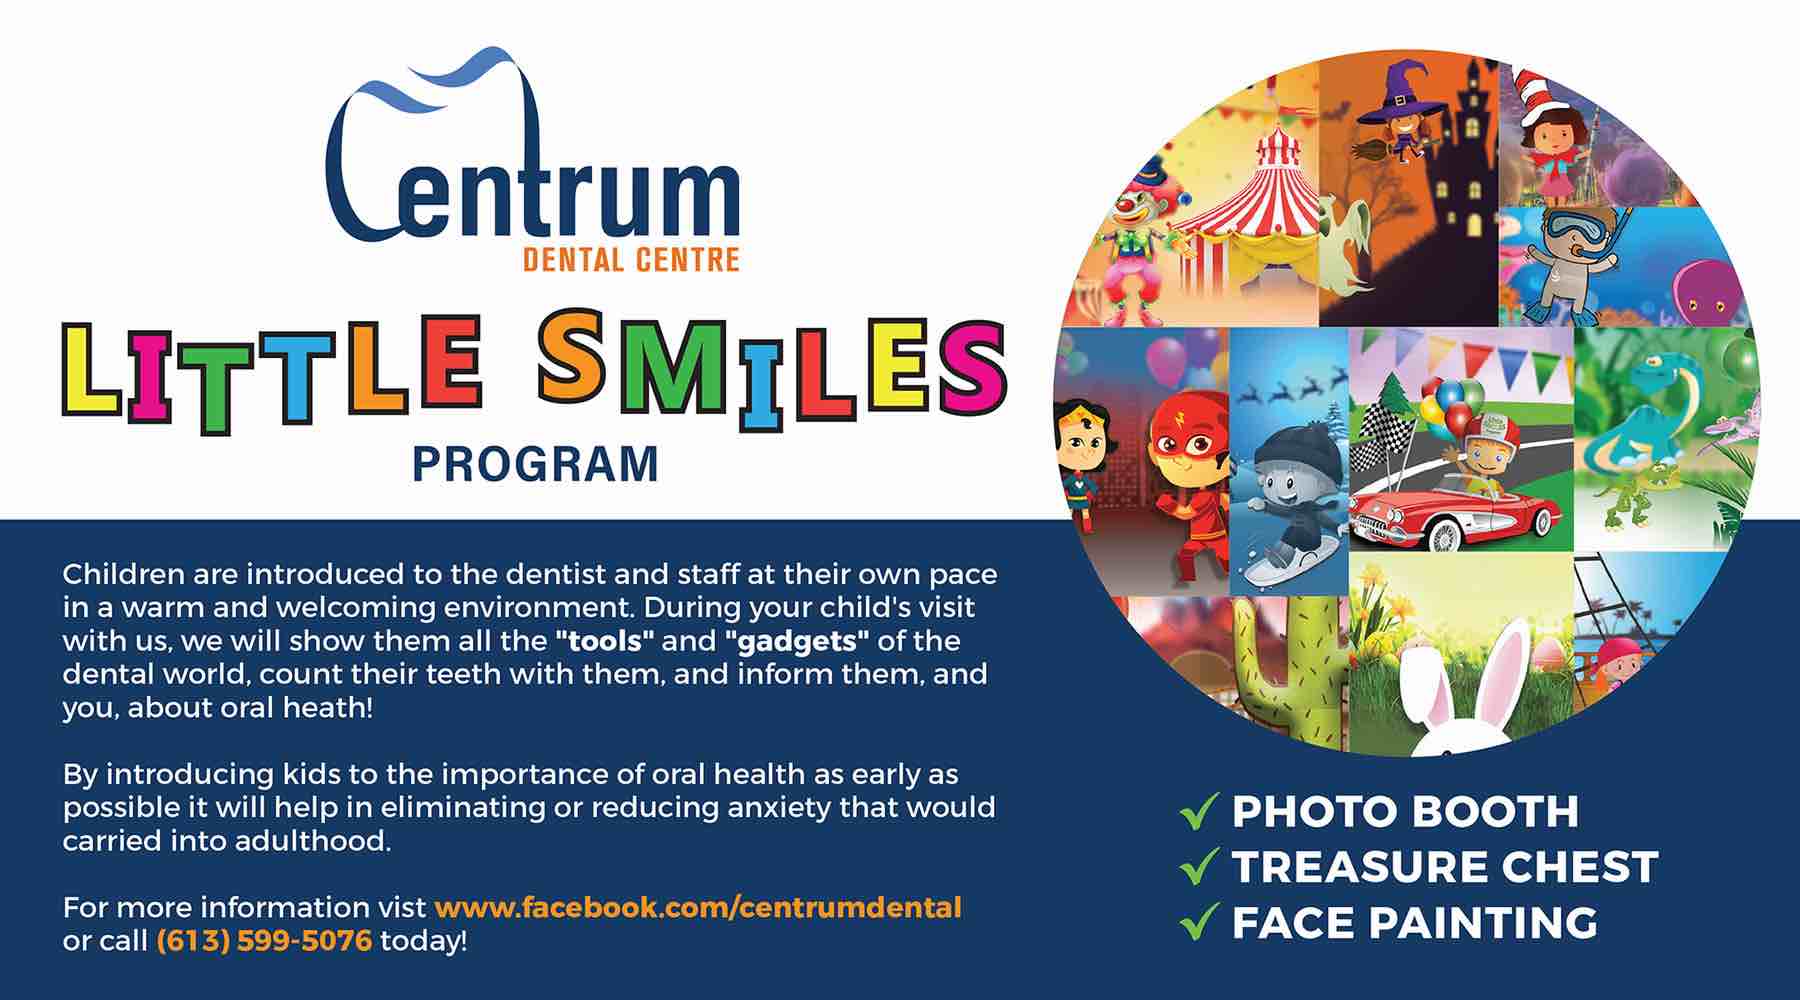 Centrum Dental Little Smiles program. Photo Booth, Treasure Chest, Face Painting. For more information call our office!